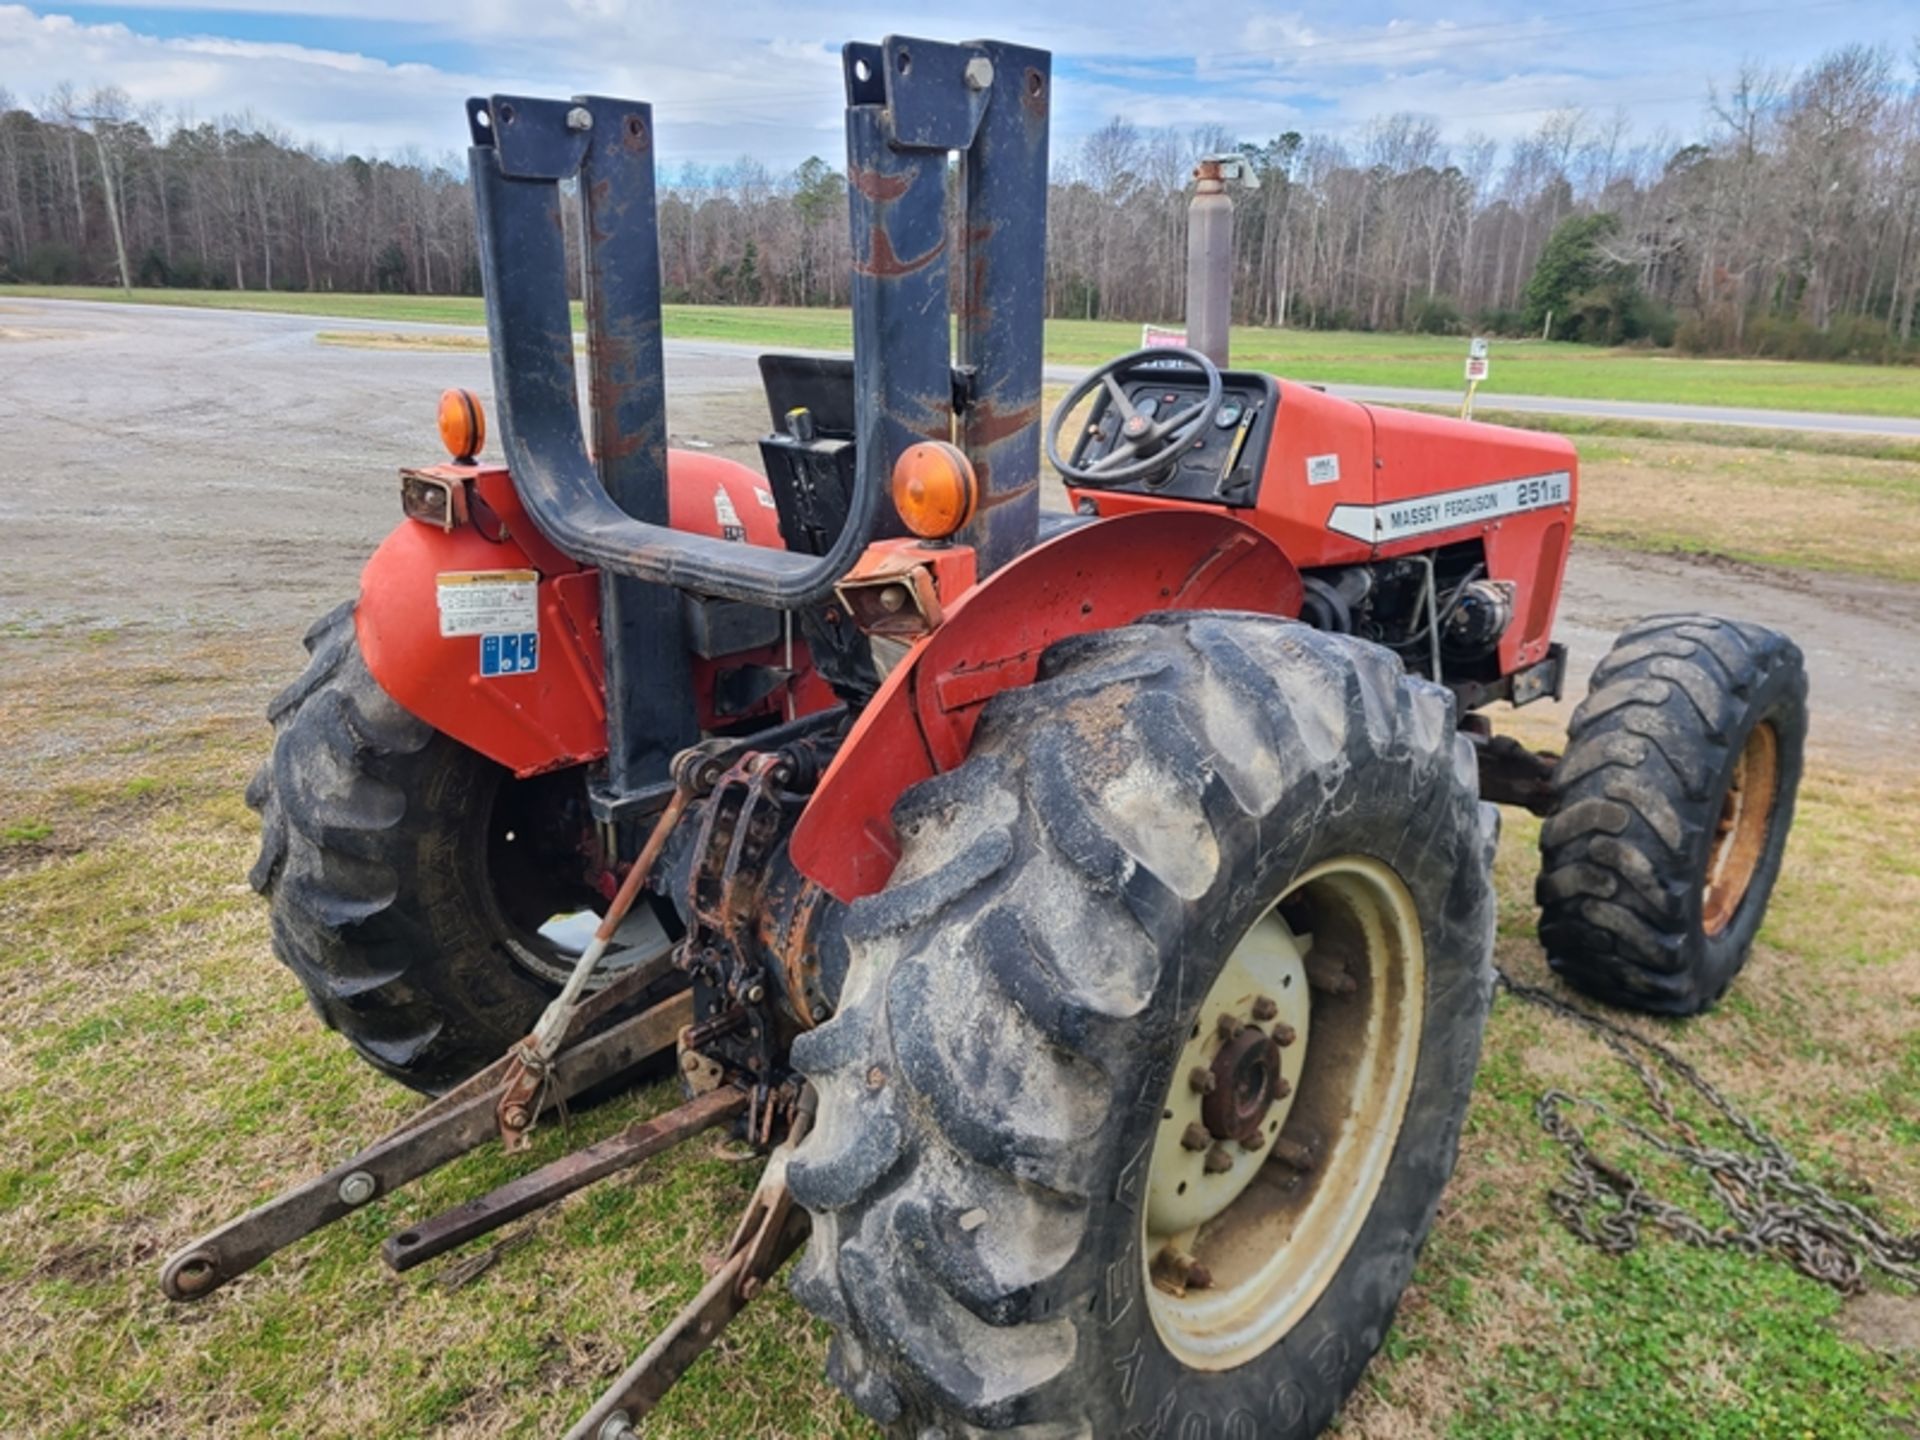 MF 251XE tractor with 4wd - SALVAGE - (no transmission) - Image 3 of 4